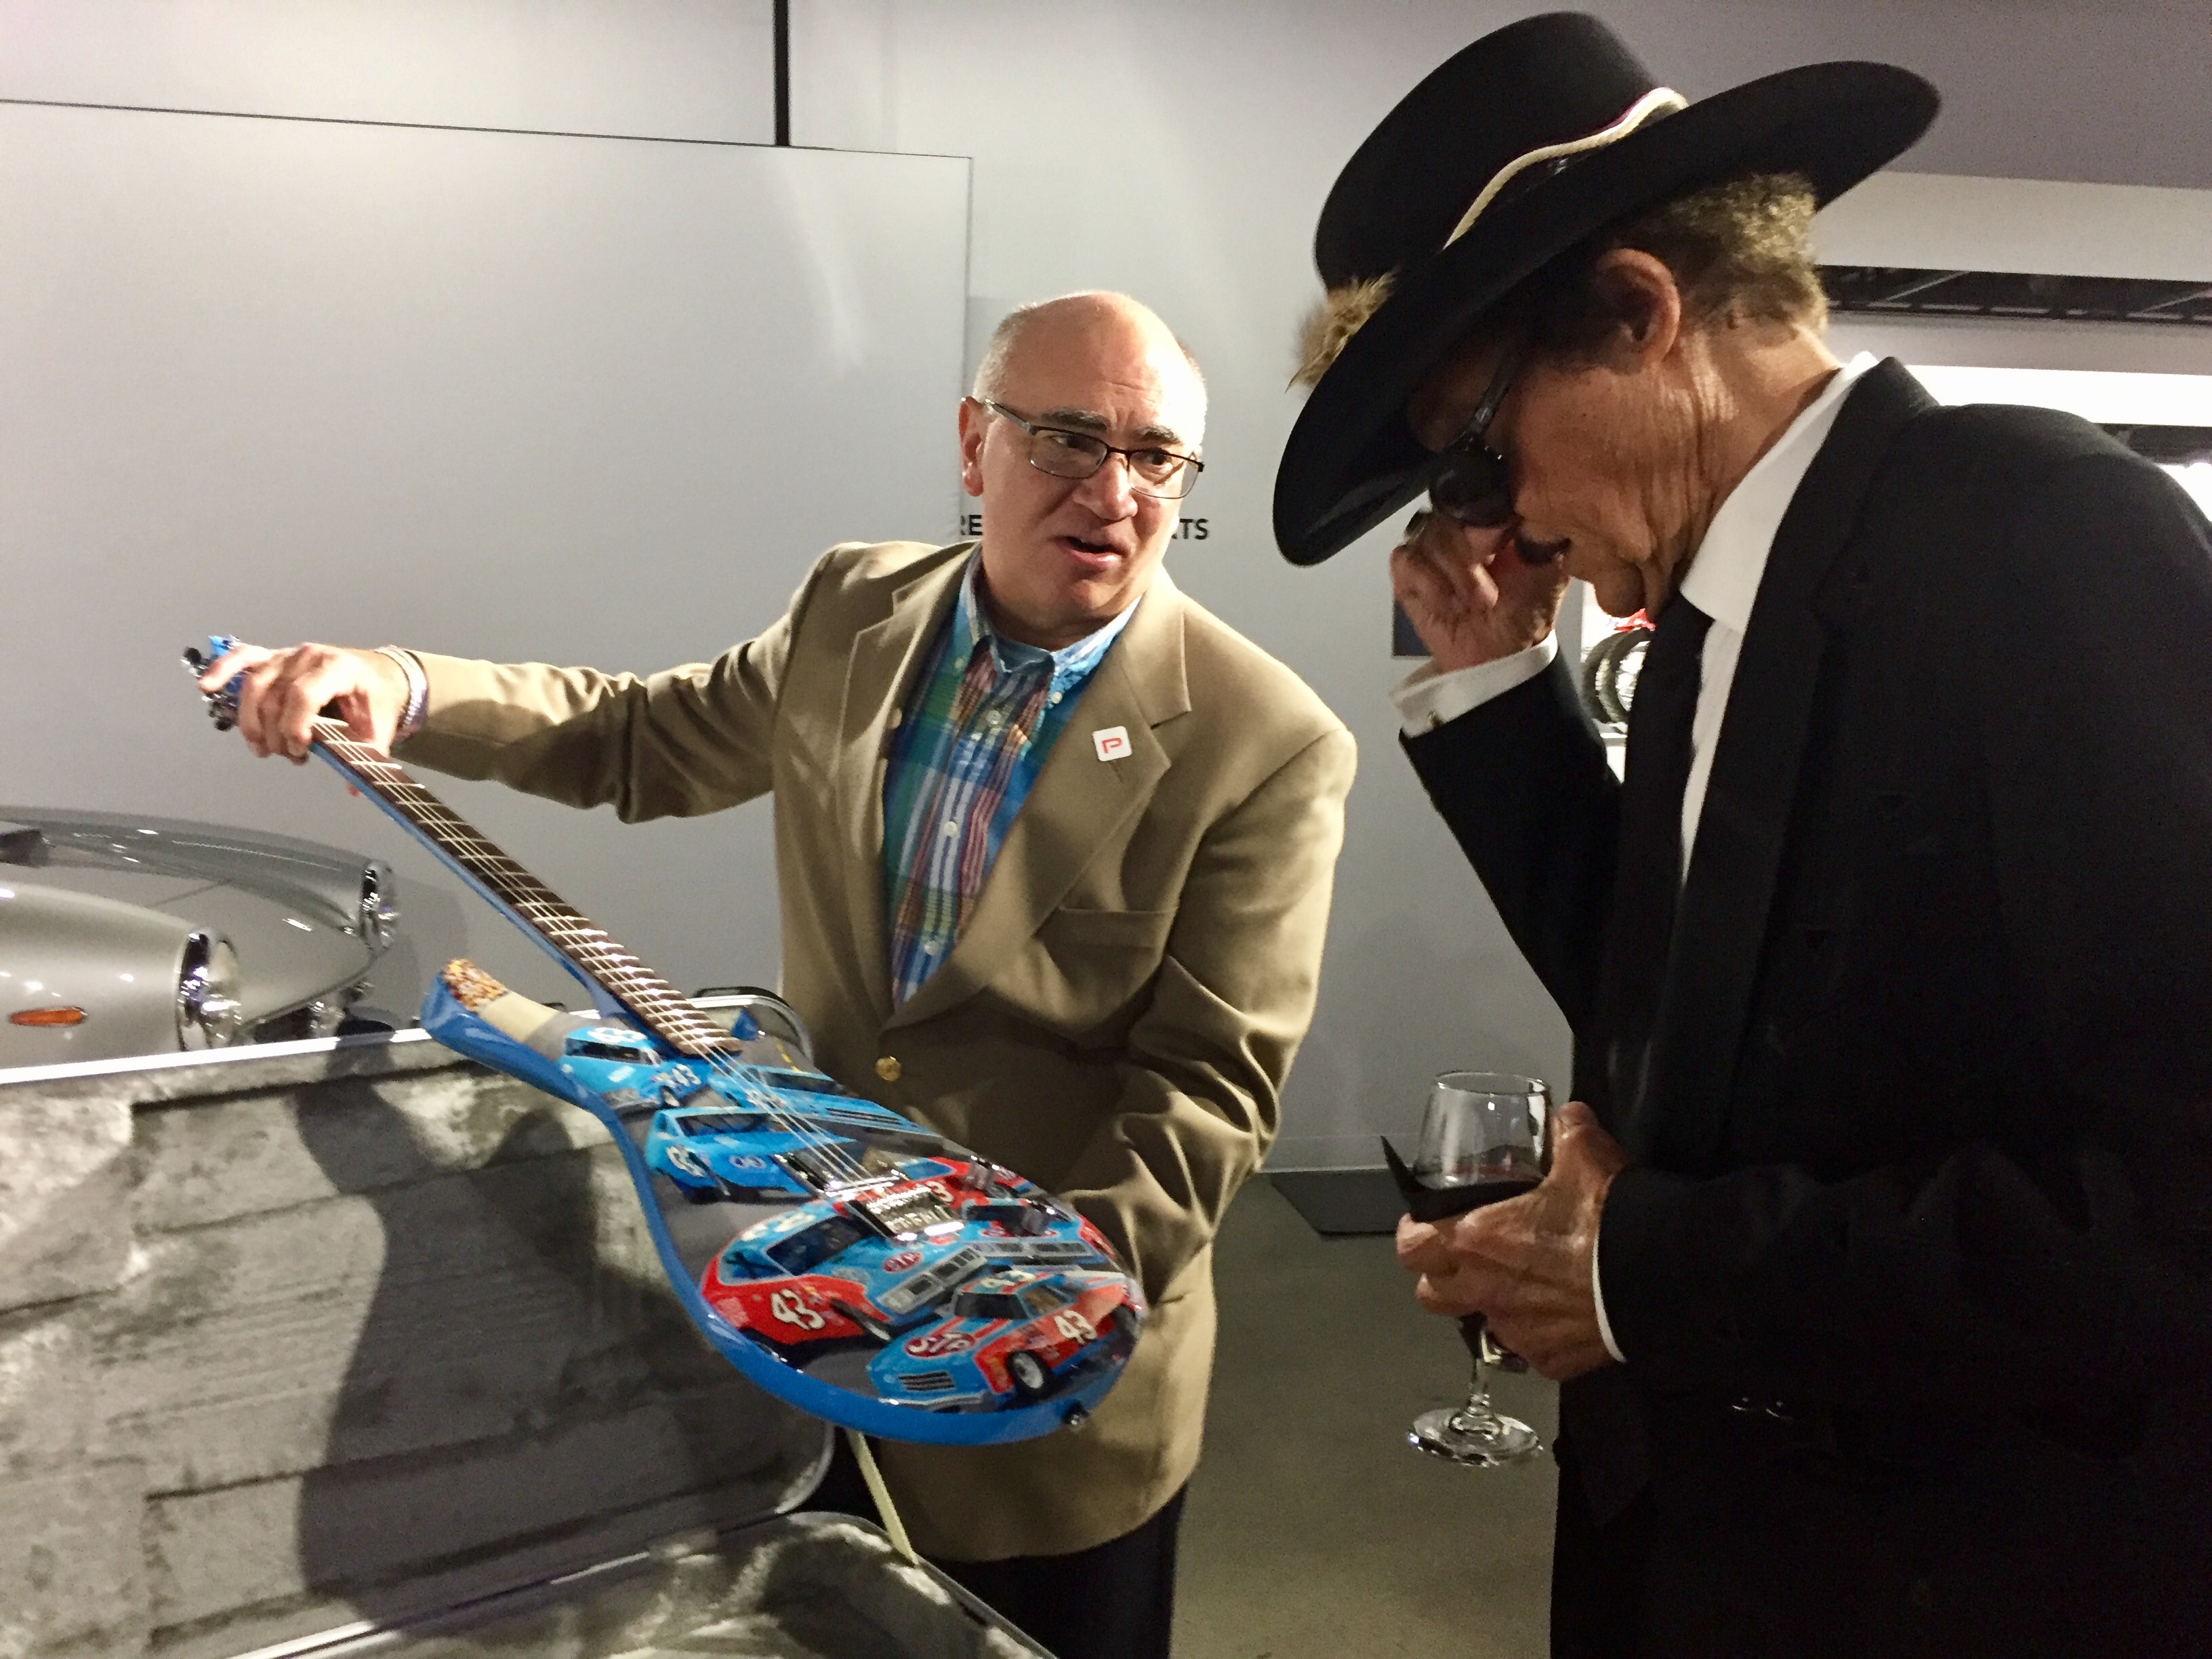 Dave with Richard Petty